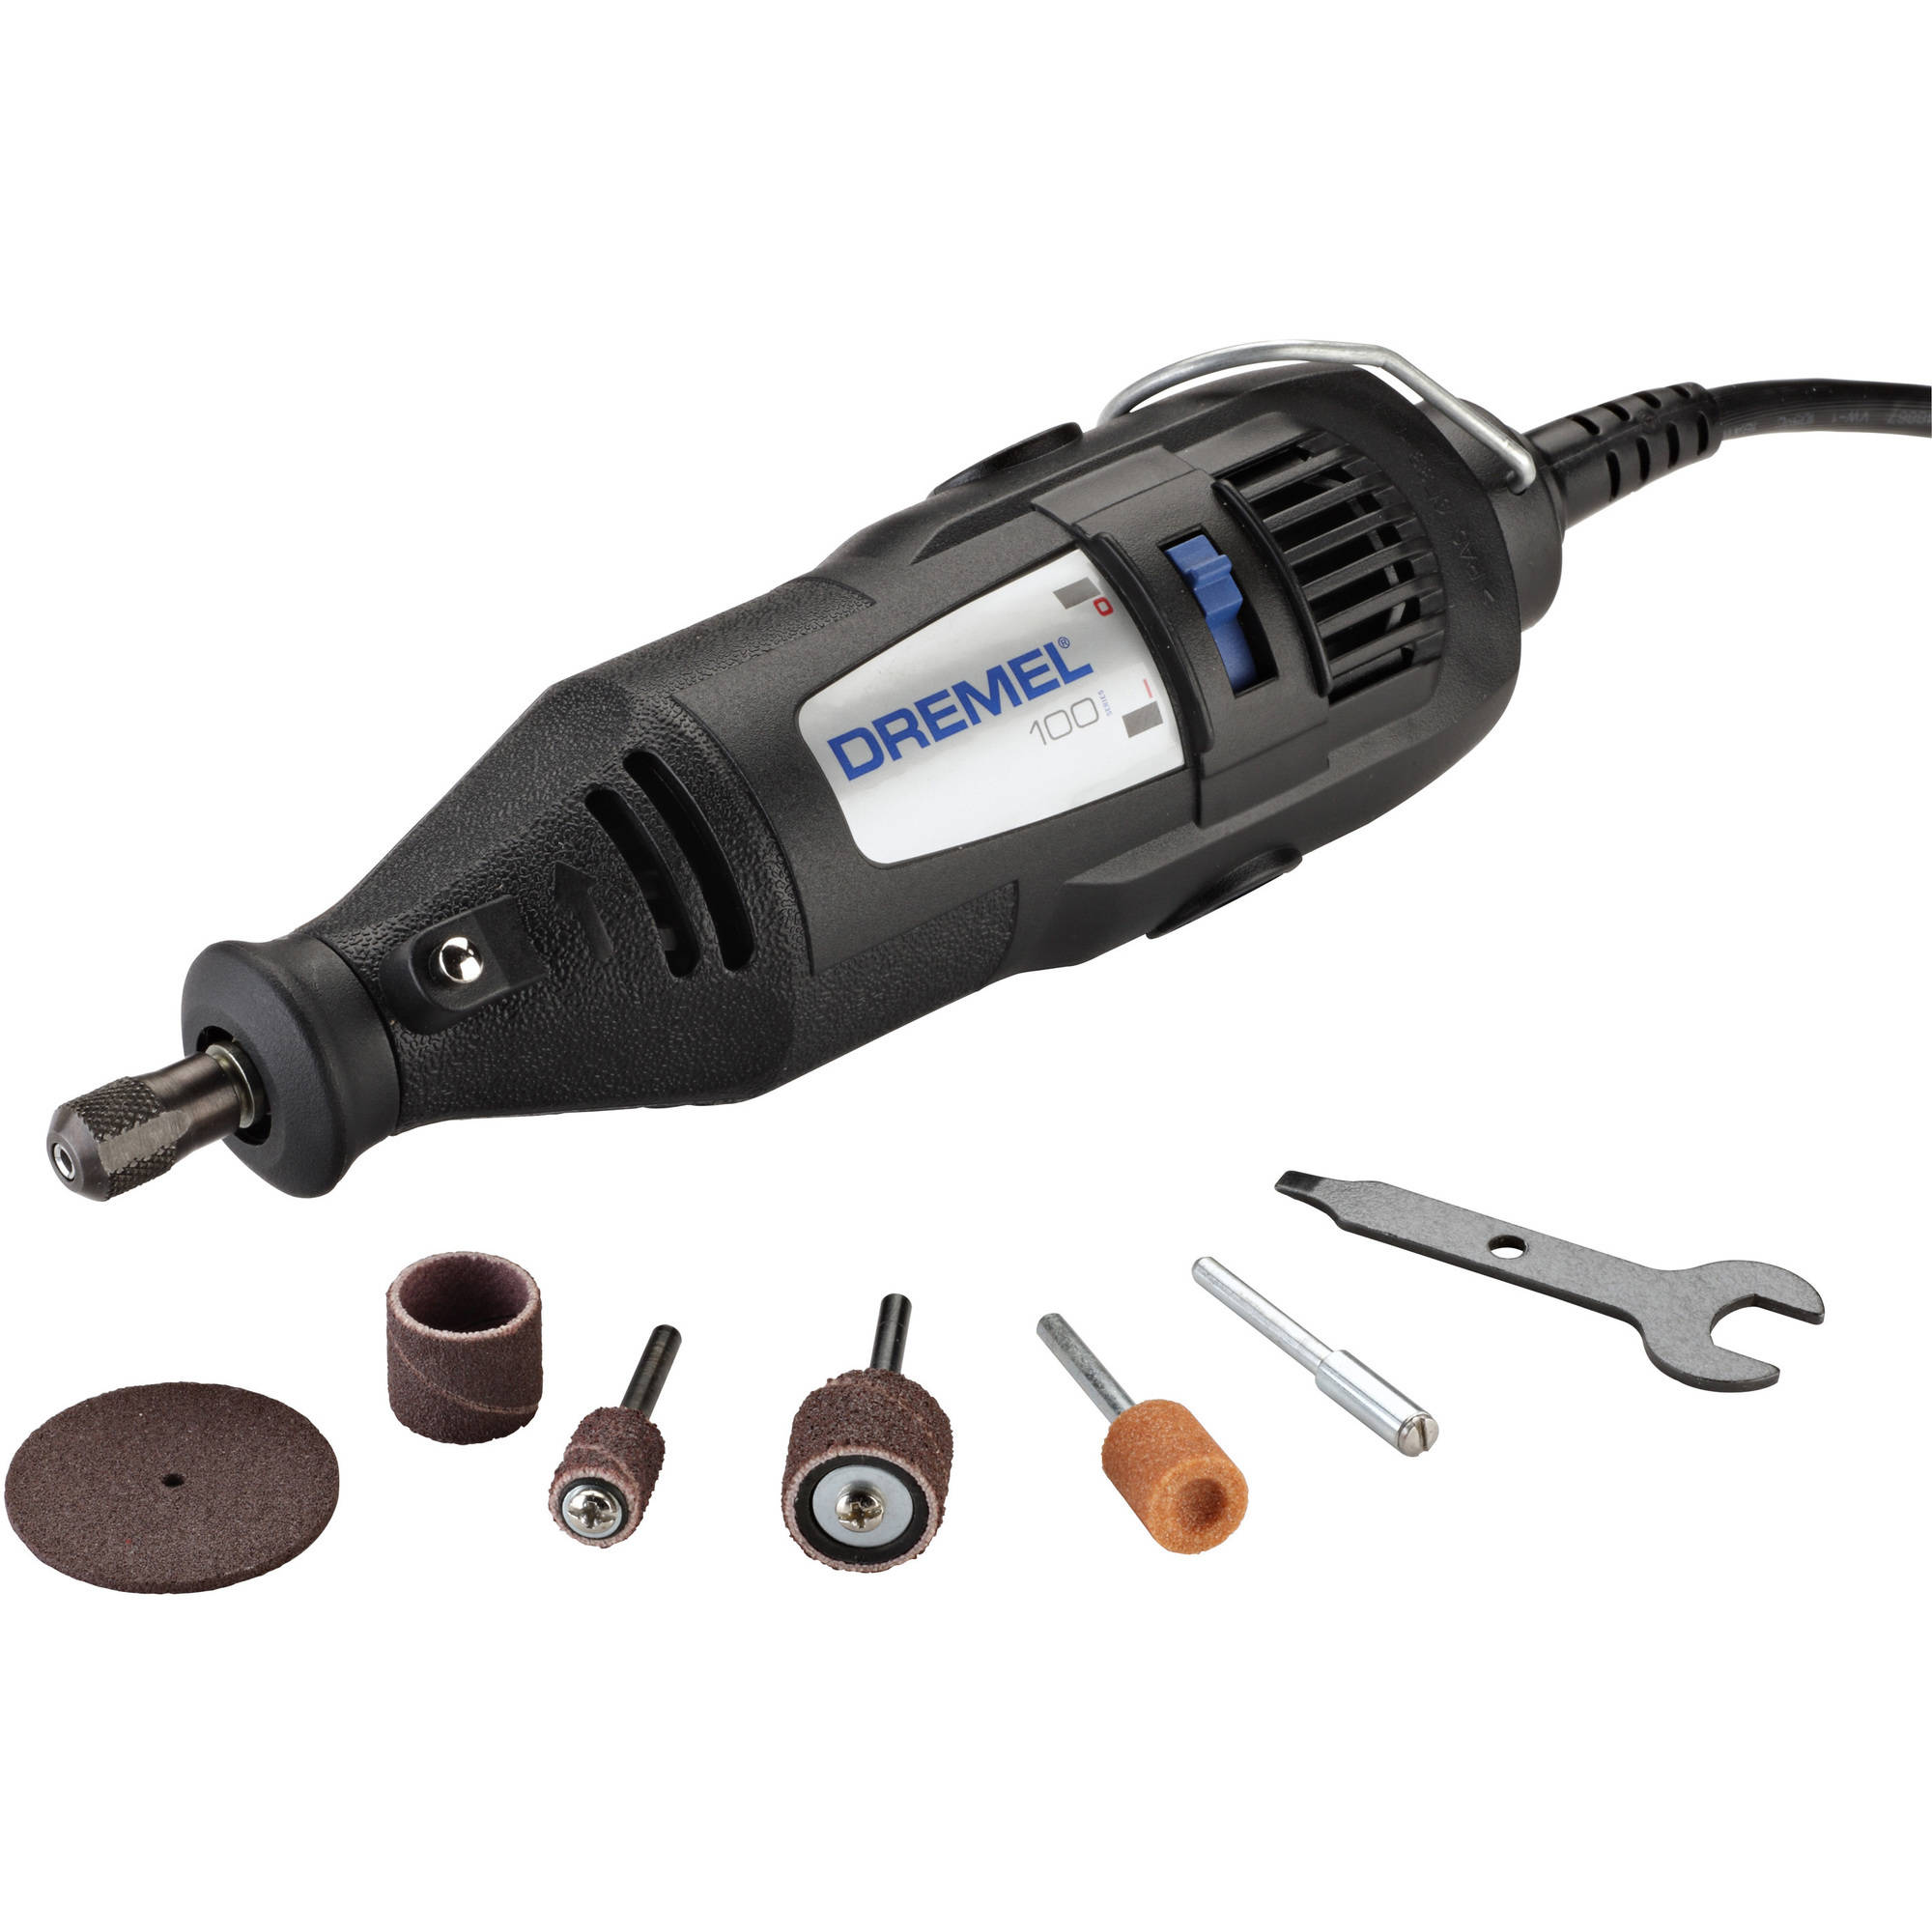 Dremel 100-N/6 Single Speed Rotary Tool Kit with 6 Accessories - image 1 of 10